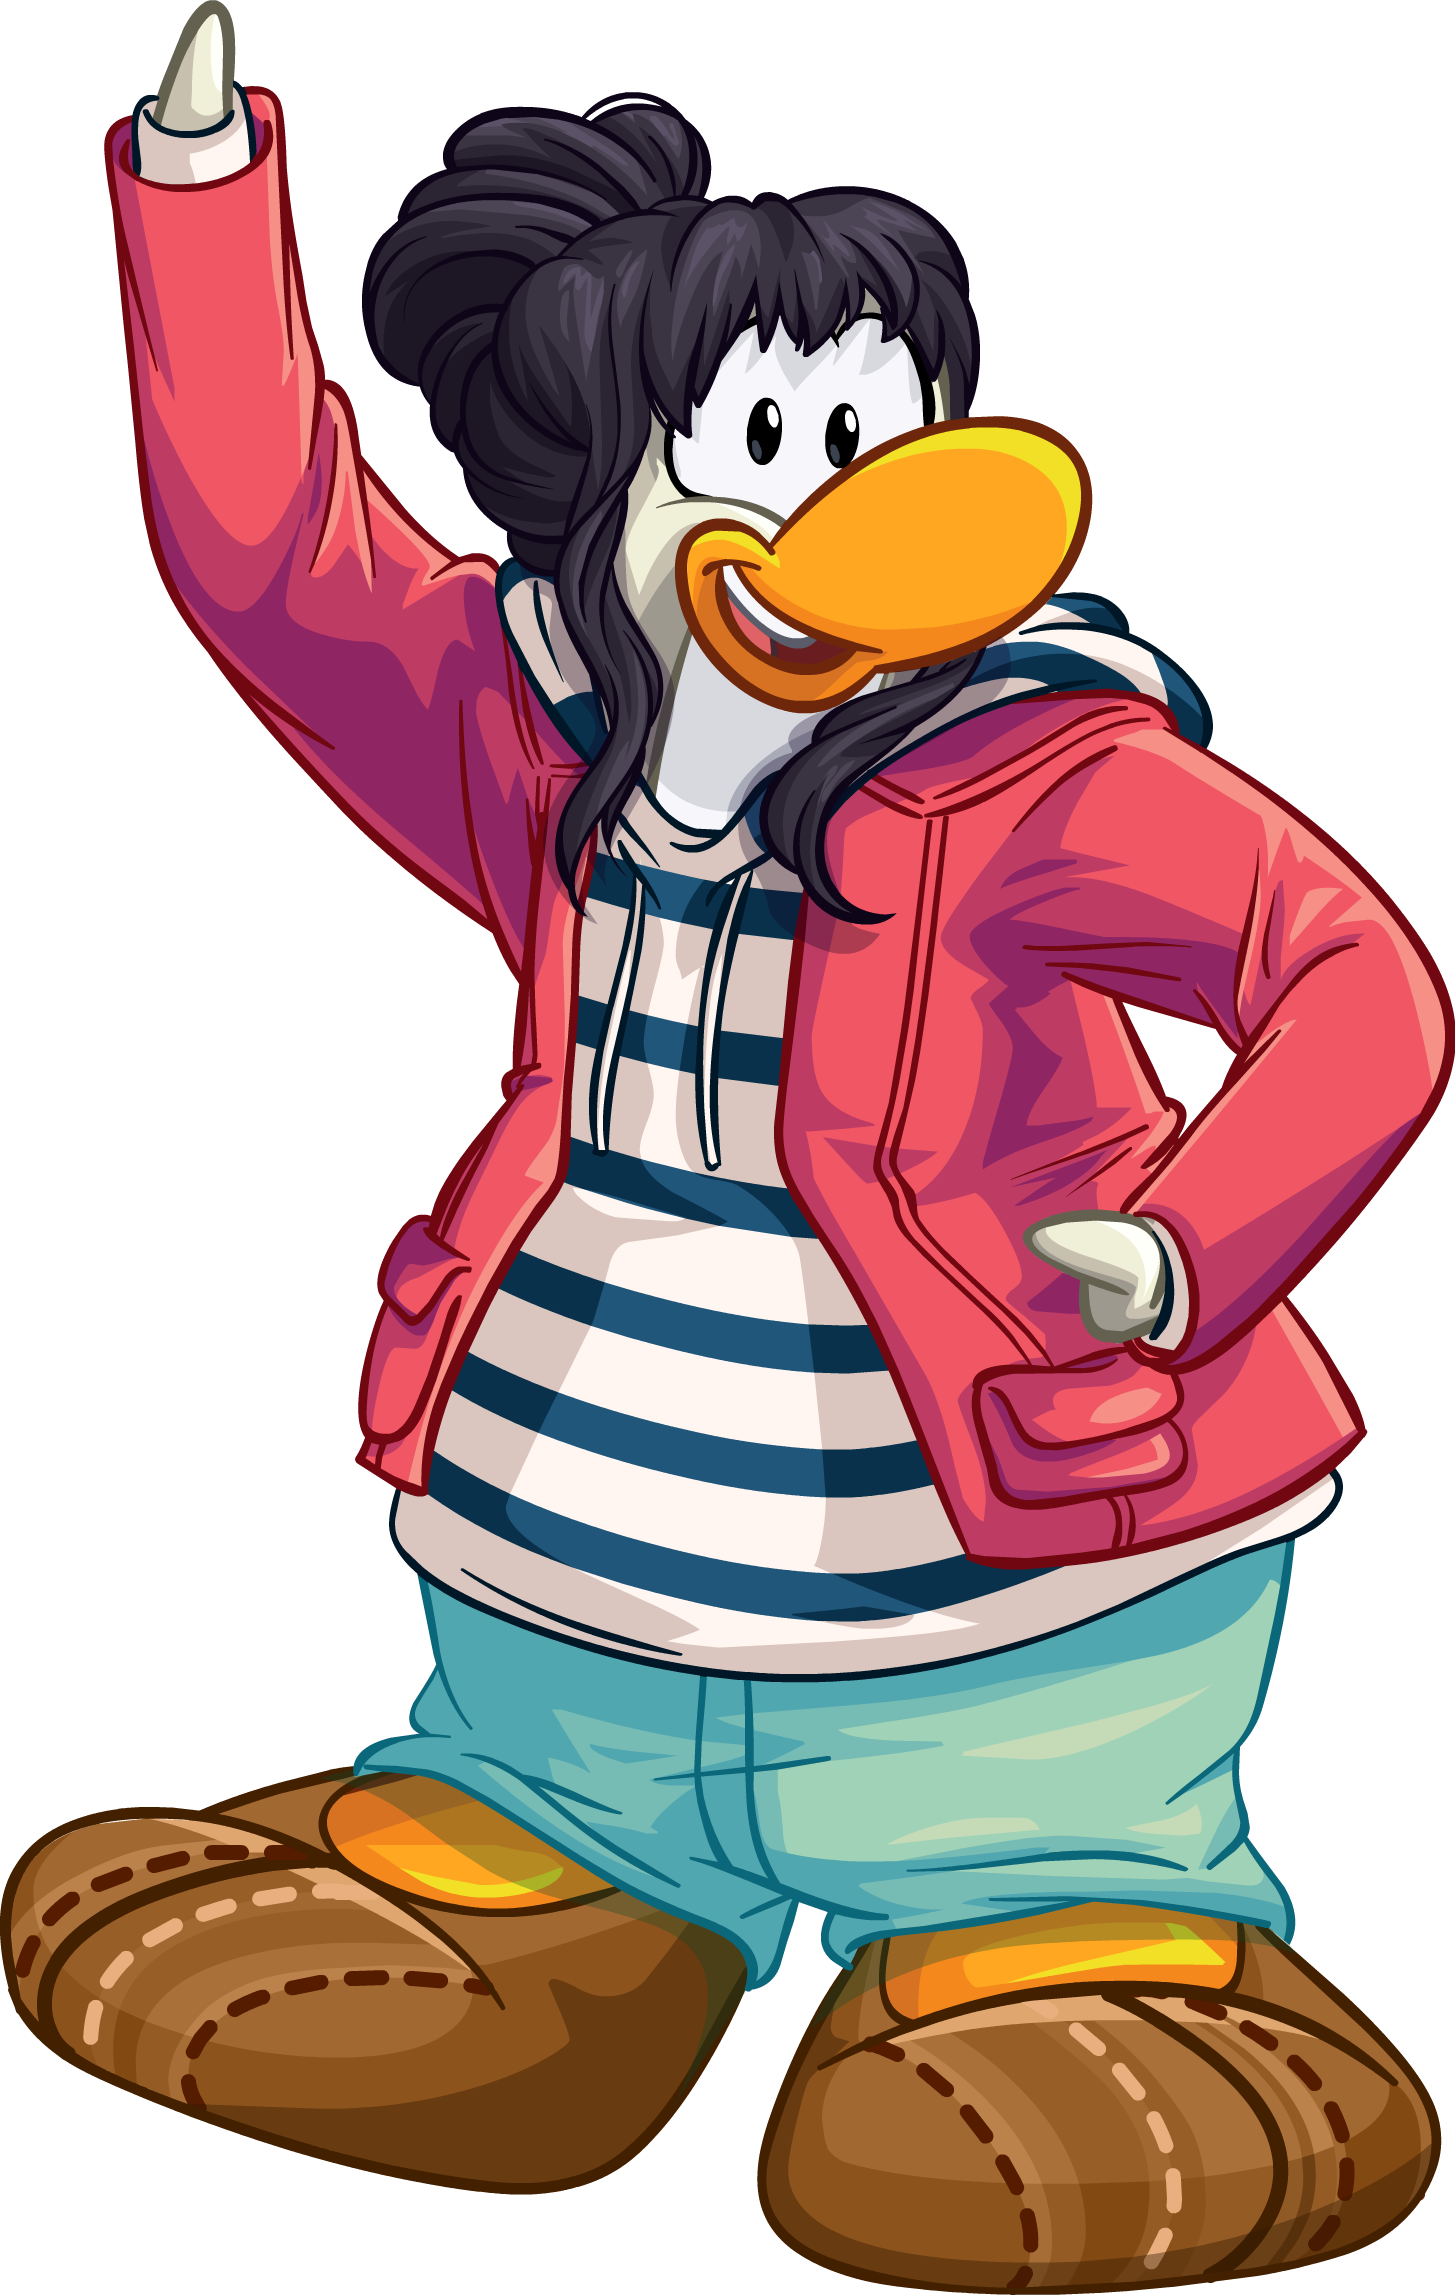 Image Penguin Style Apr 2014 3 Png Club Penguin Wiki Fandom Powered By Wikia